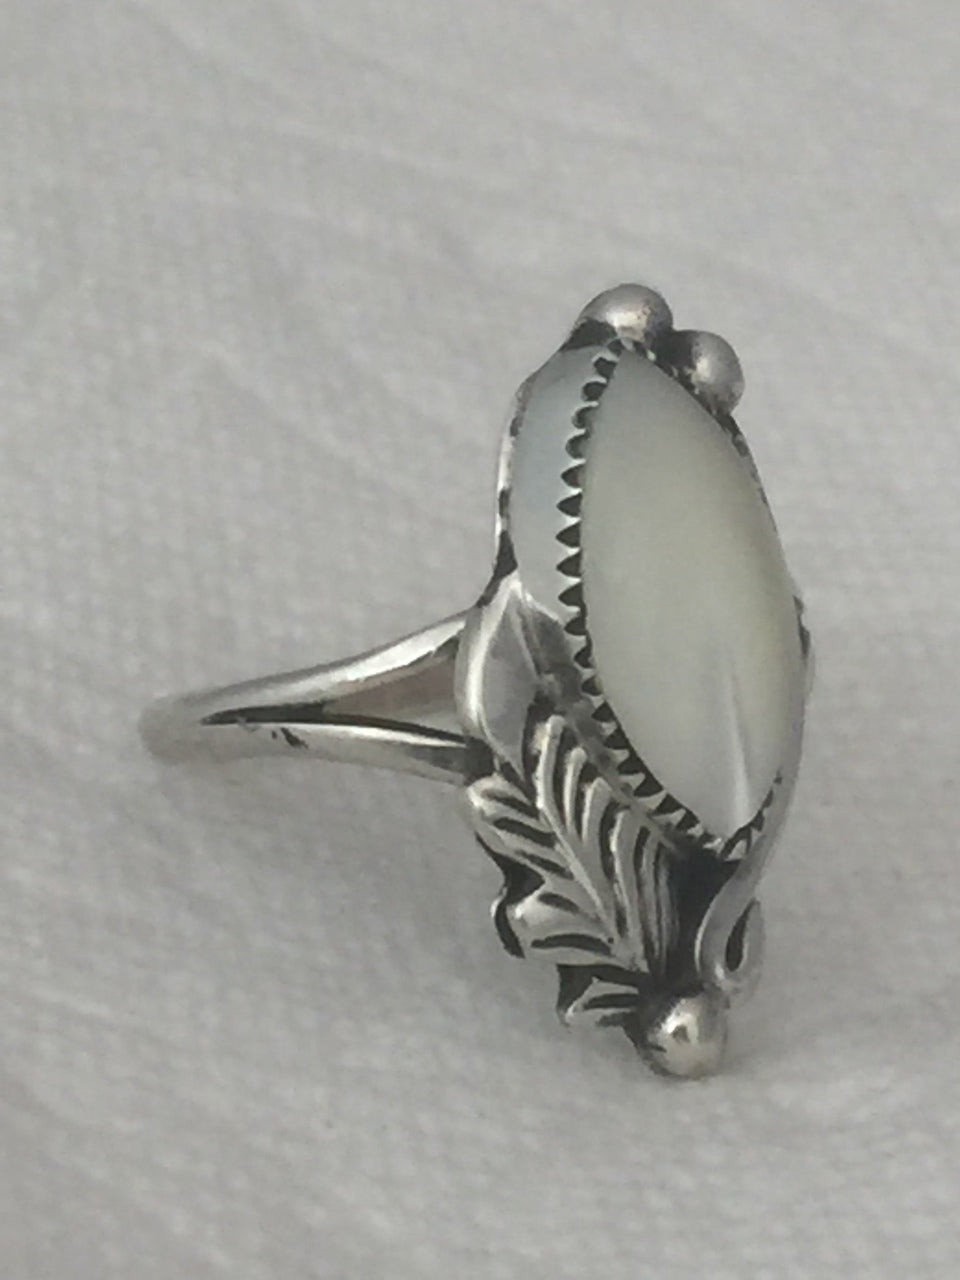 Vintage Sterling Silver  Native American Navajo Mother of Pearl Ring Size 8  3.3g